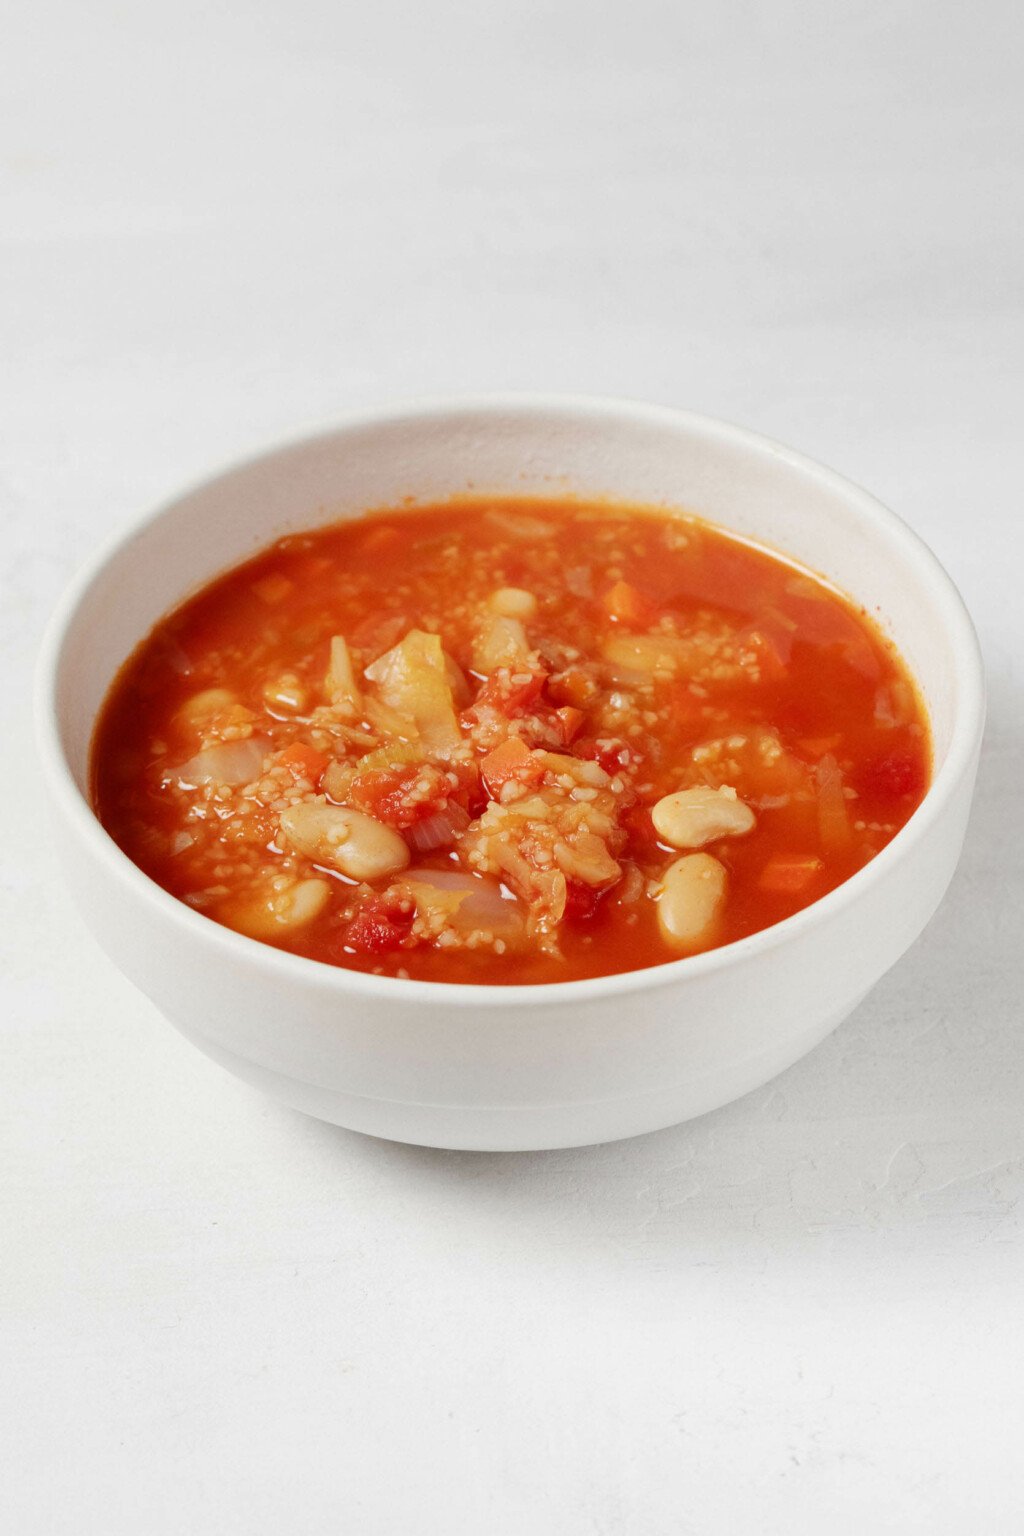 An image of a white bowl of red-colored soup, which is filled with bulgur wheat and white beans.